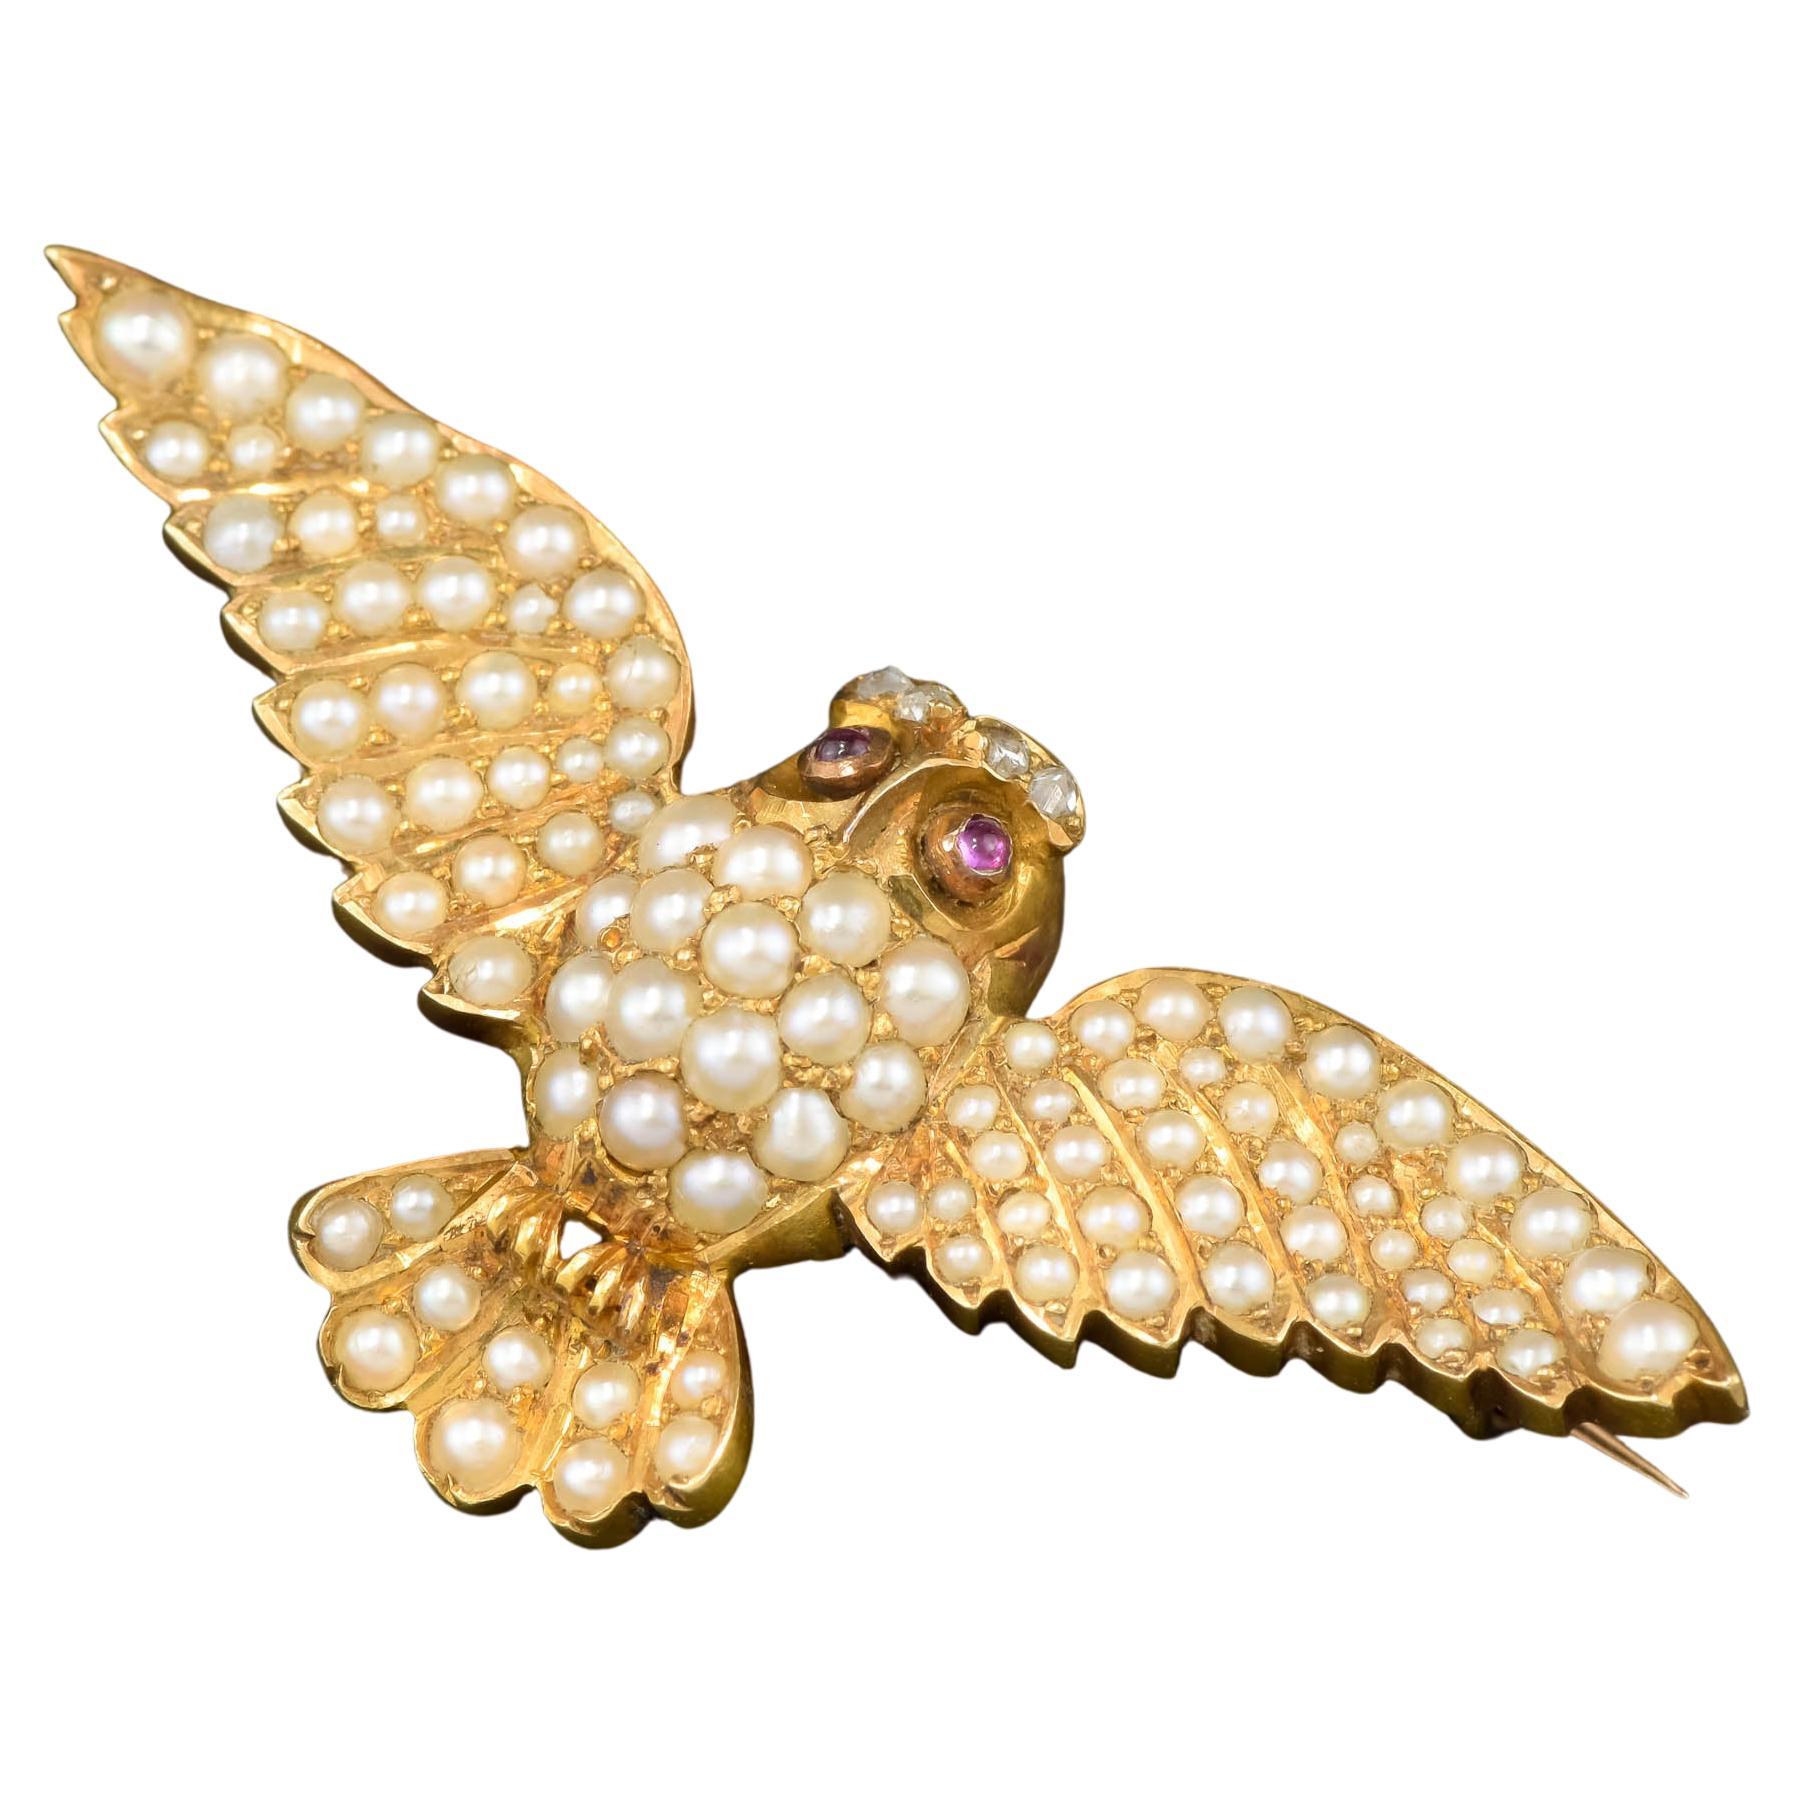 I'm delighted to offer this very fine quality Art Nouveau gold Flying Owl Brooch Pin, that would also be amazing worn as a pendant necklace (I’ve included two photos of the Owl threaded through the clasp of an antique gold chain – which is not